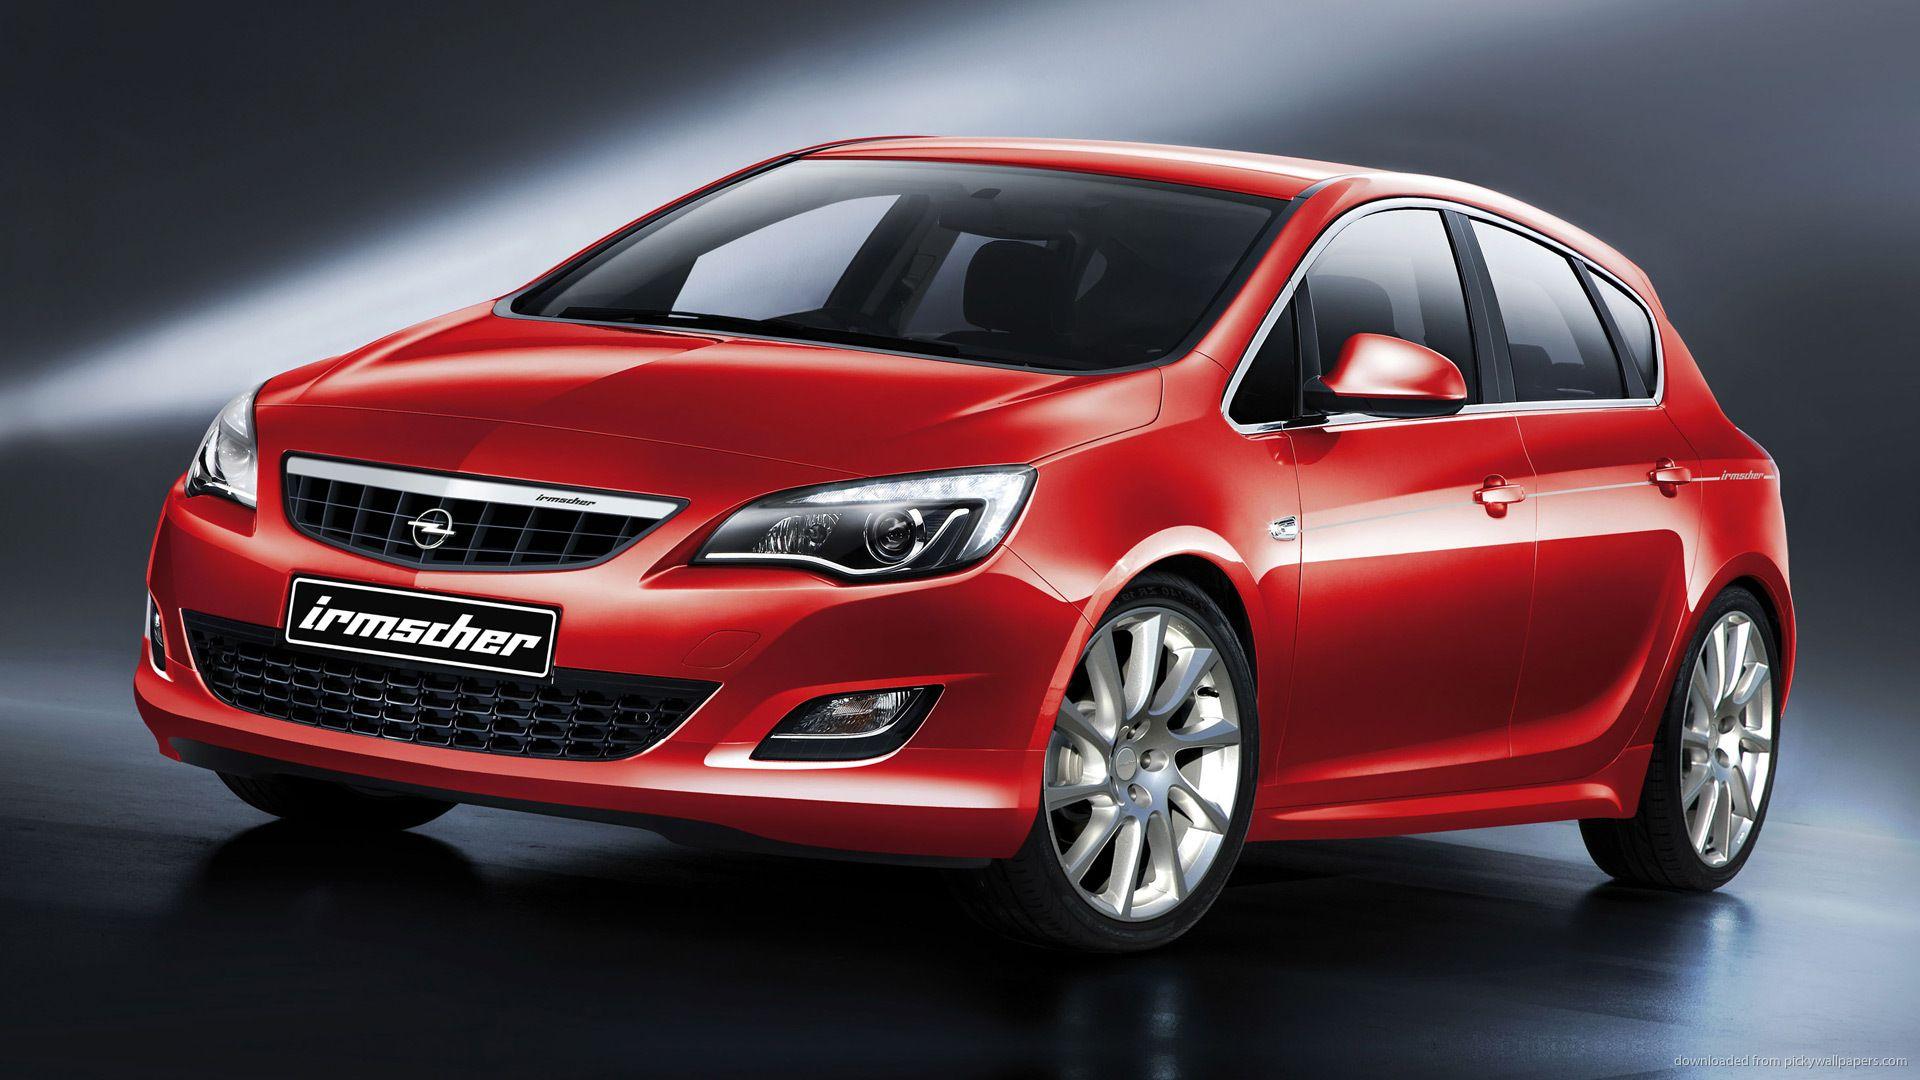 Opel Astra Wallpaper For Nokia X2